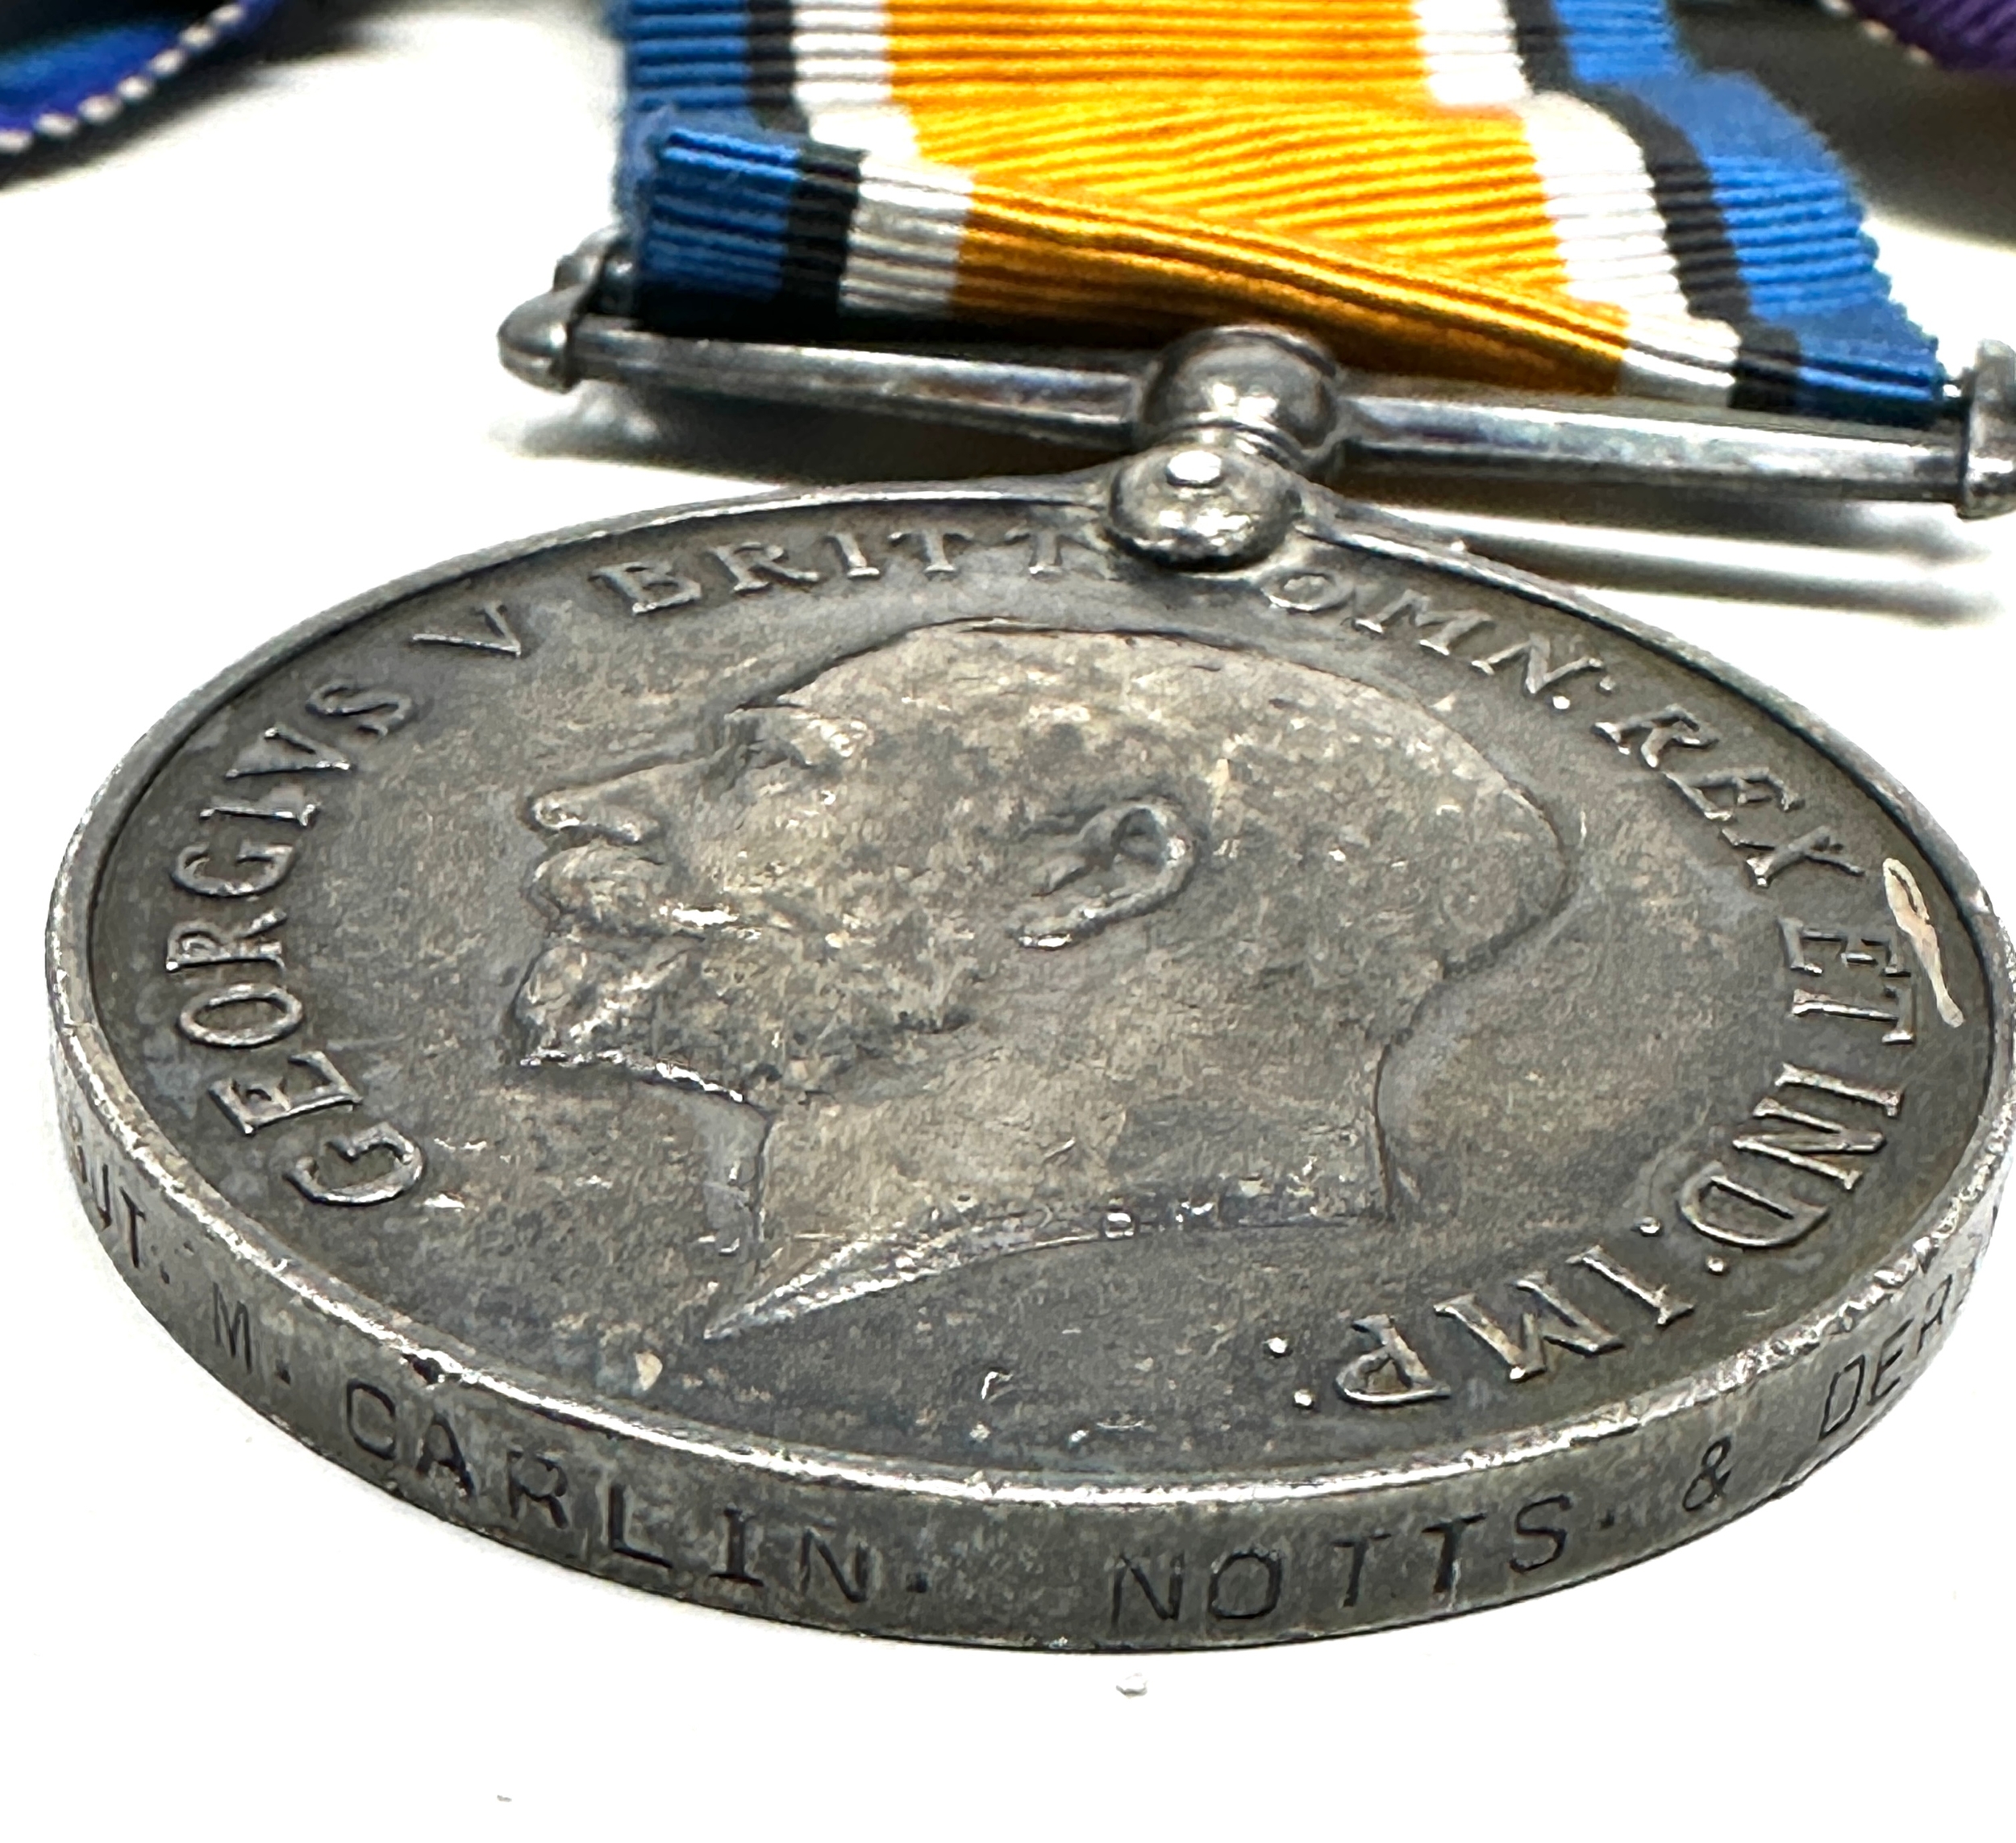 ww1 -ww2 mounted medal group to 240865 sjt m carlin notts & derby star named 6952 pte h.m carlin - Image 4 of 4